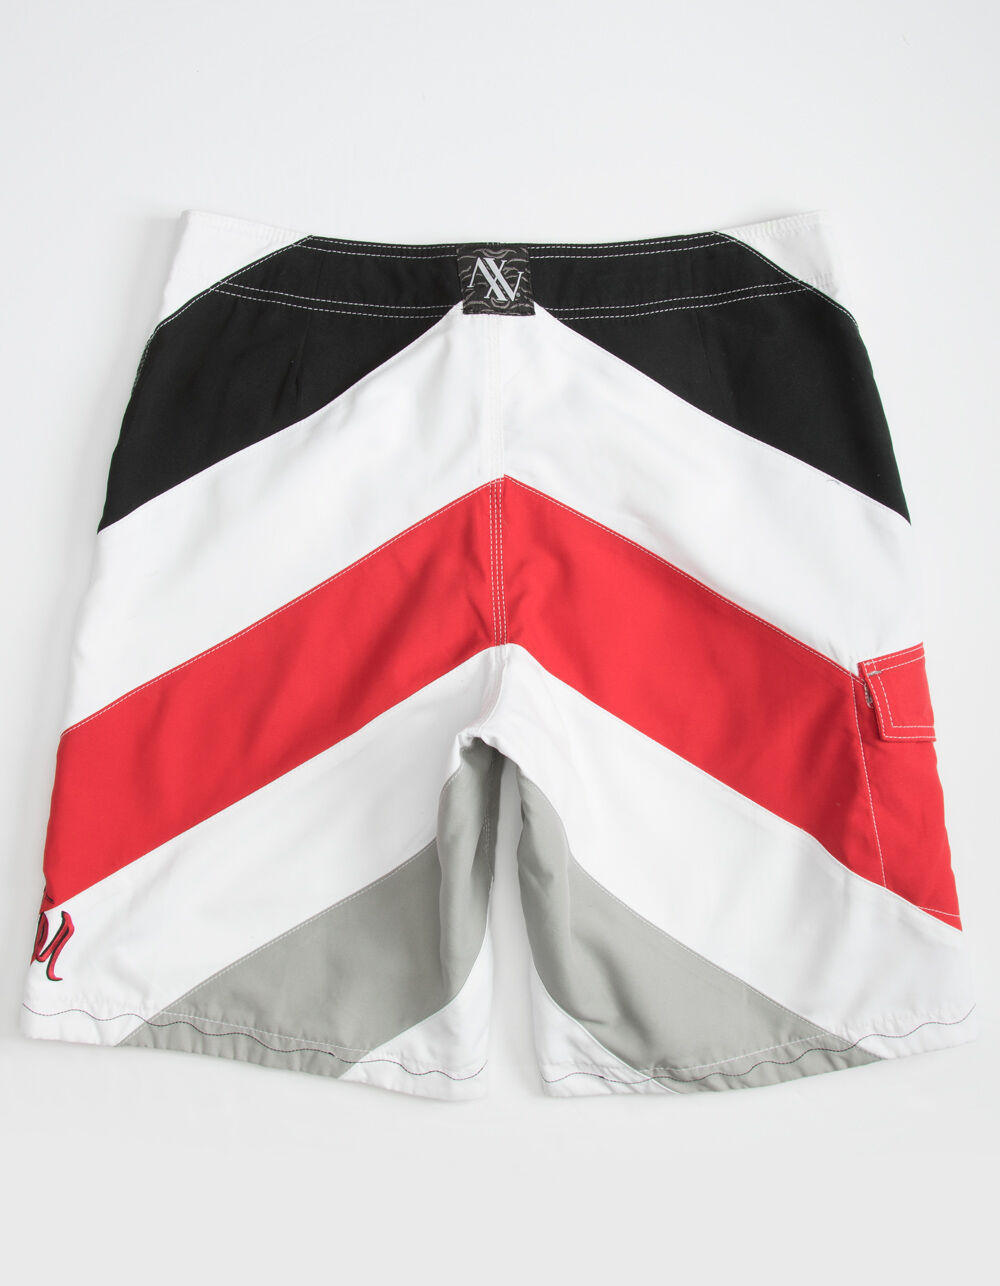 ATWATER Control Mens Boardshorts - BLK/WHT/RED | Tillys